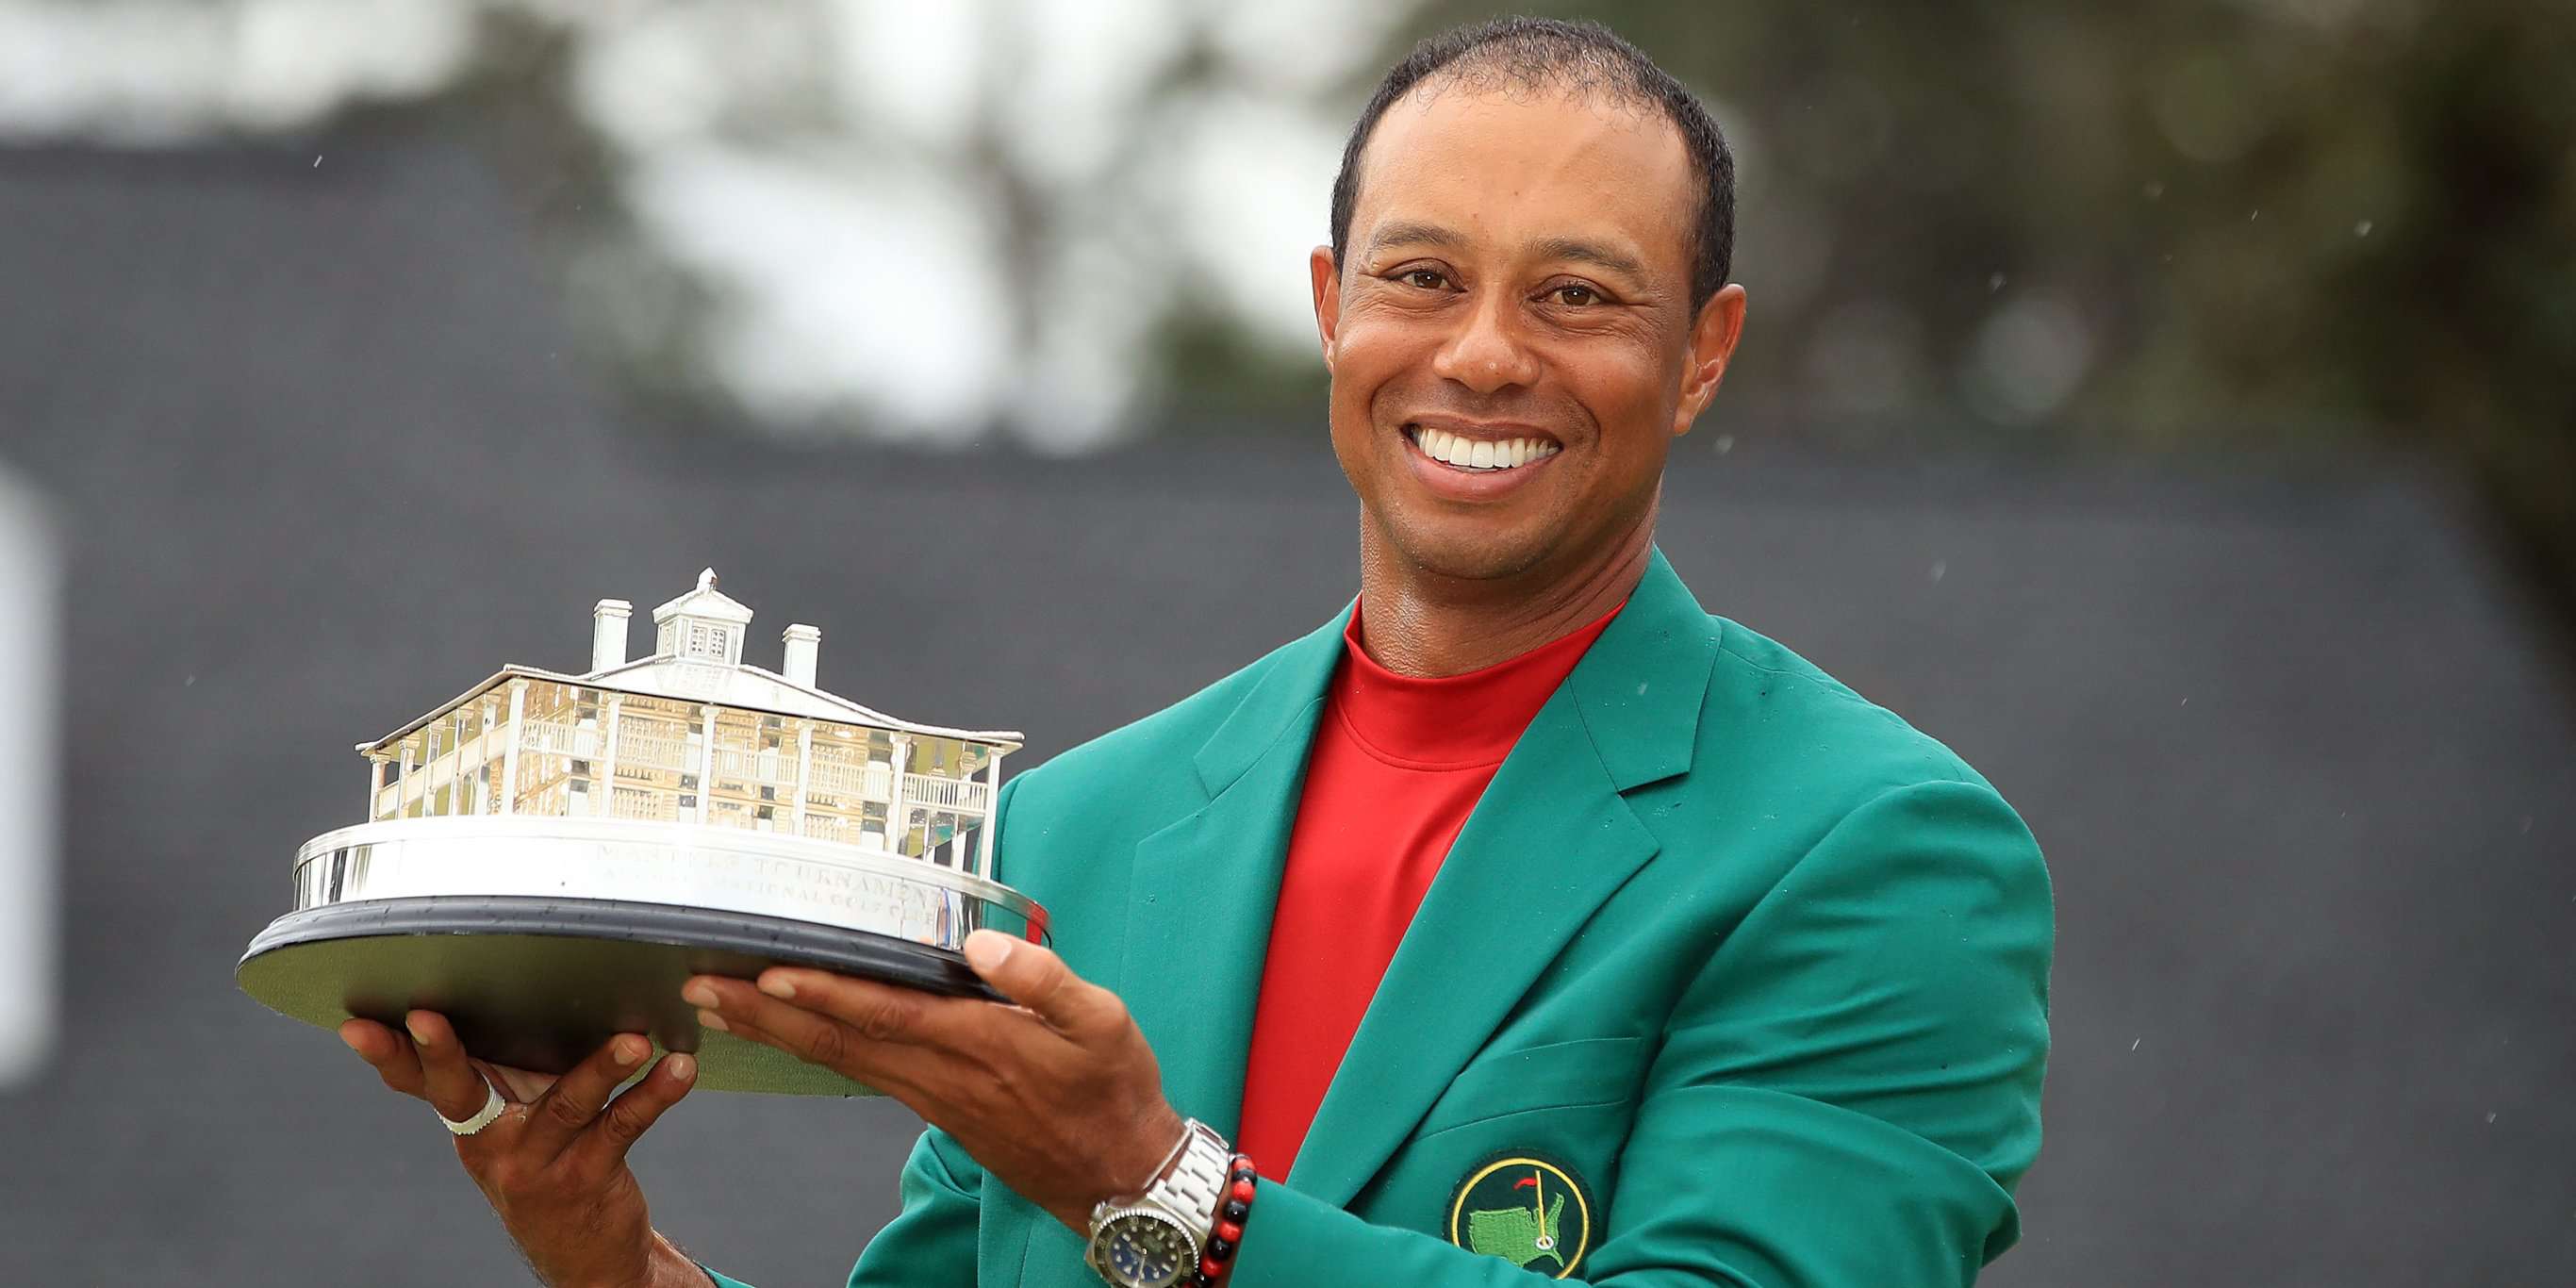 Taboola Ad Example 53526 - Tiger Woods Has Won More Money Than Any Other Golfer. Here's How He Makes And Spends His Millions.